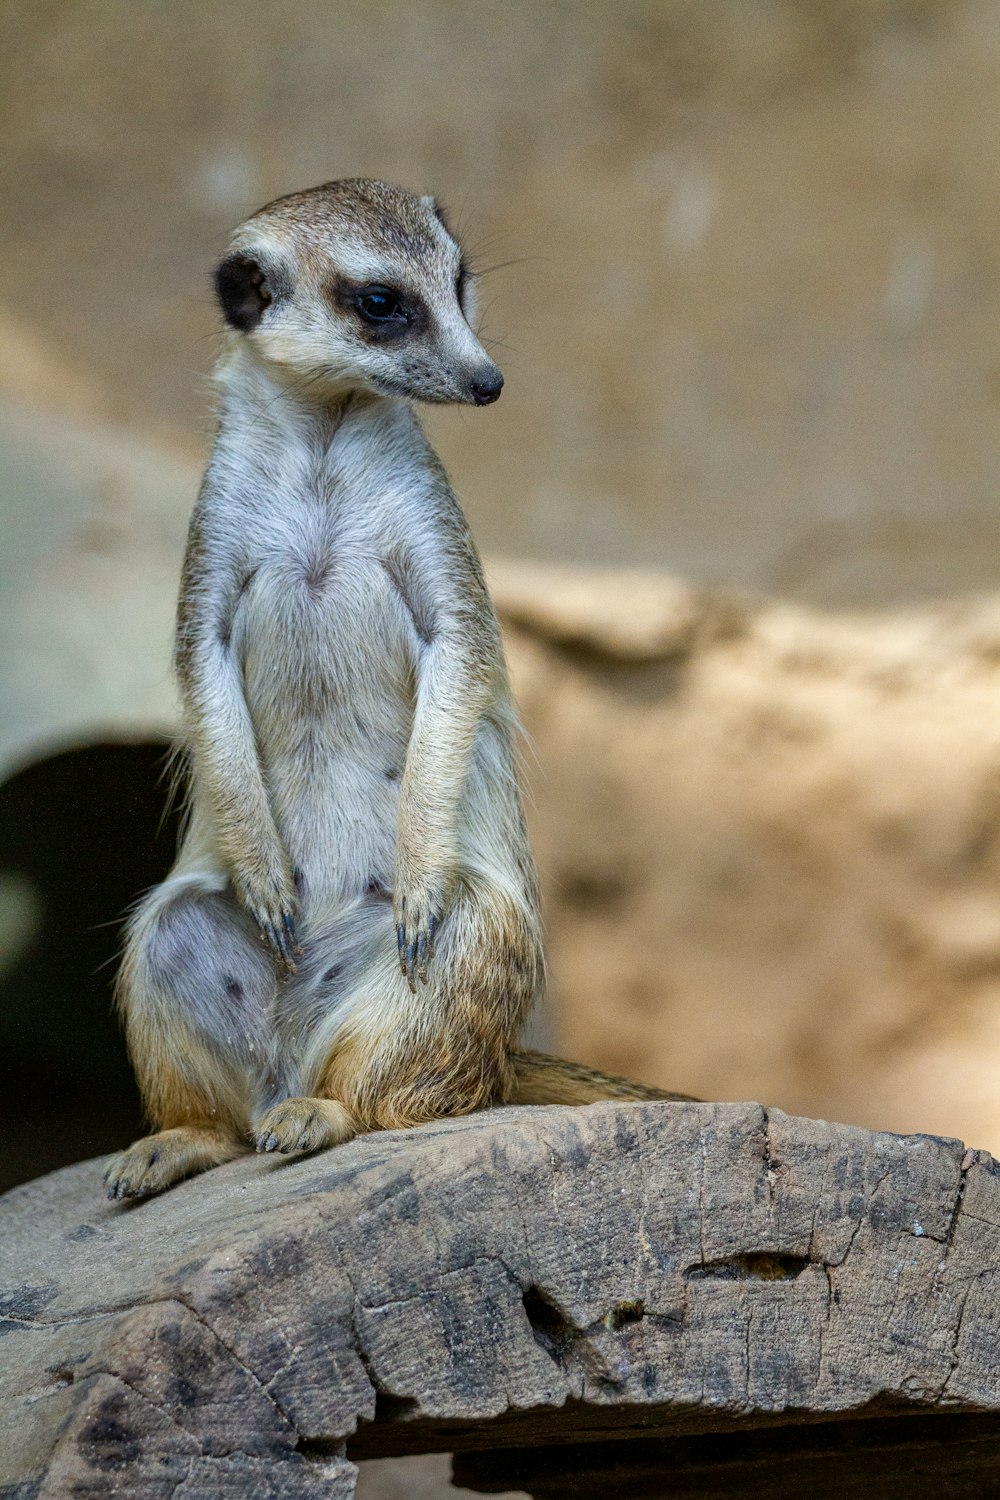 A small meerkat sitting on top of a piece of wood photo – Free Memphis  Image on Unsplash